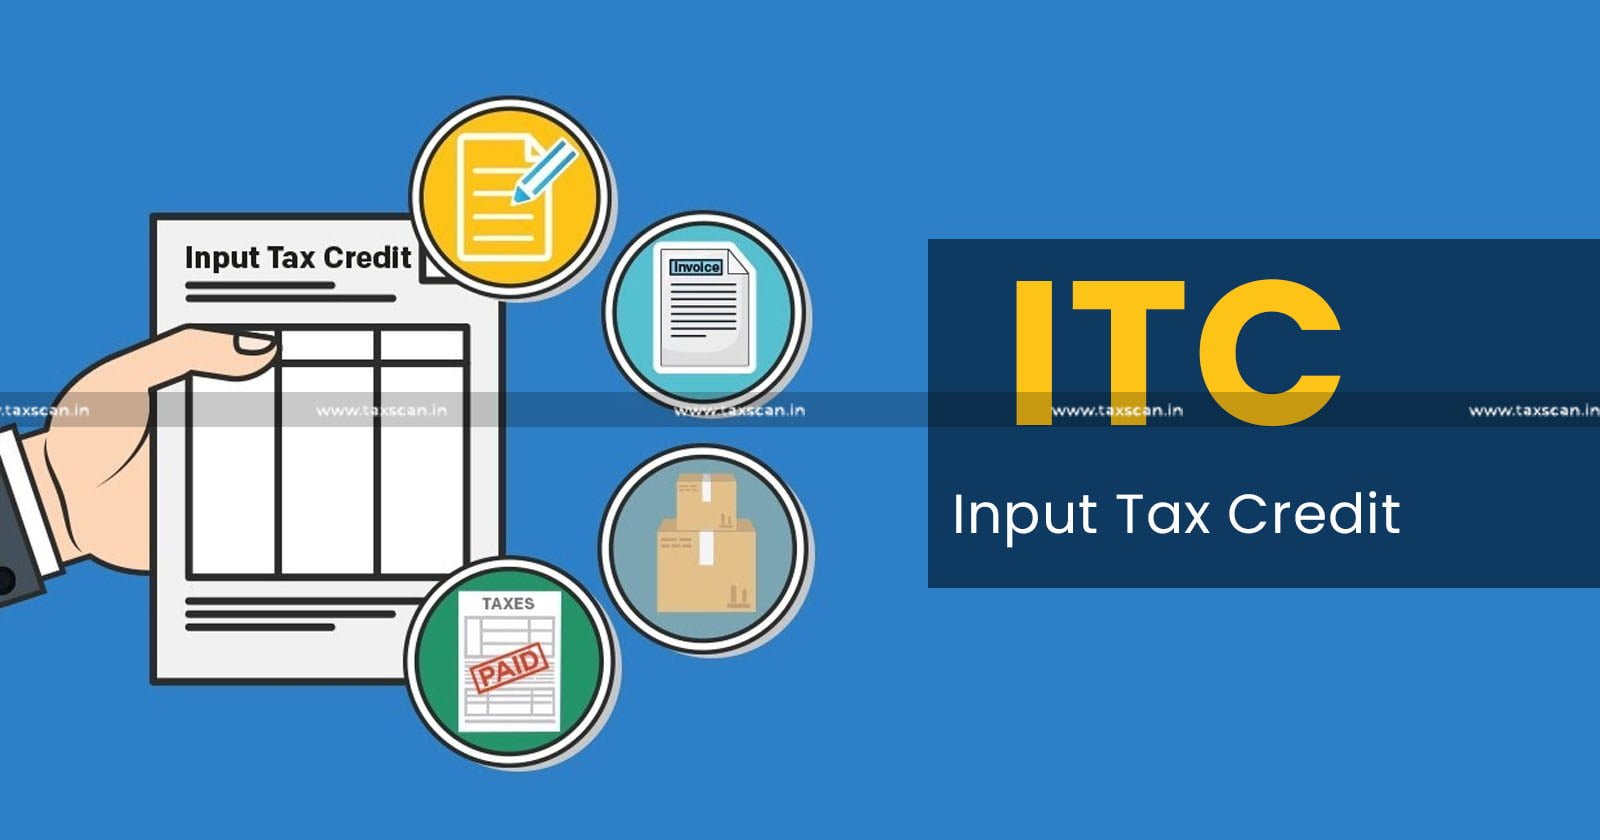 Rectification Filed - Error in Reporting Outward supplies- ITC - Madras HC - GST Demand - Reconsideration on Pre-deposit - taxscan